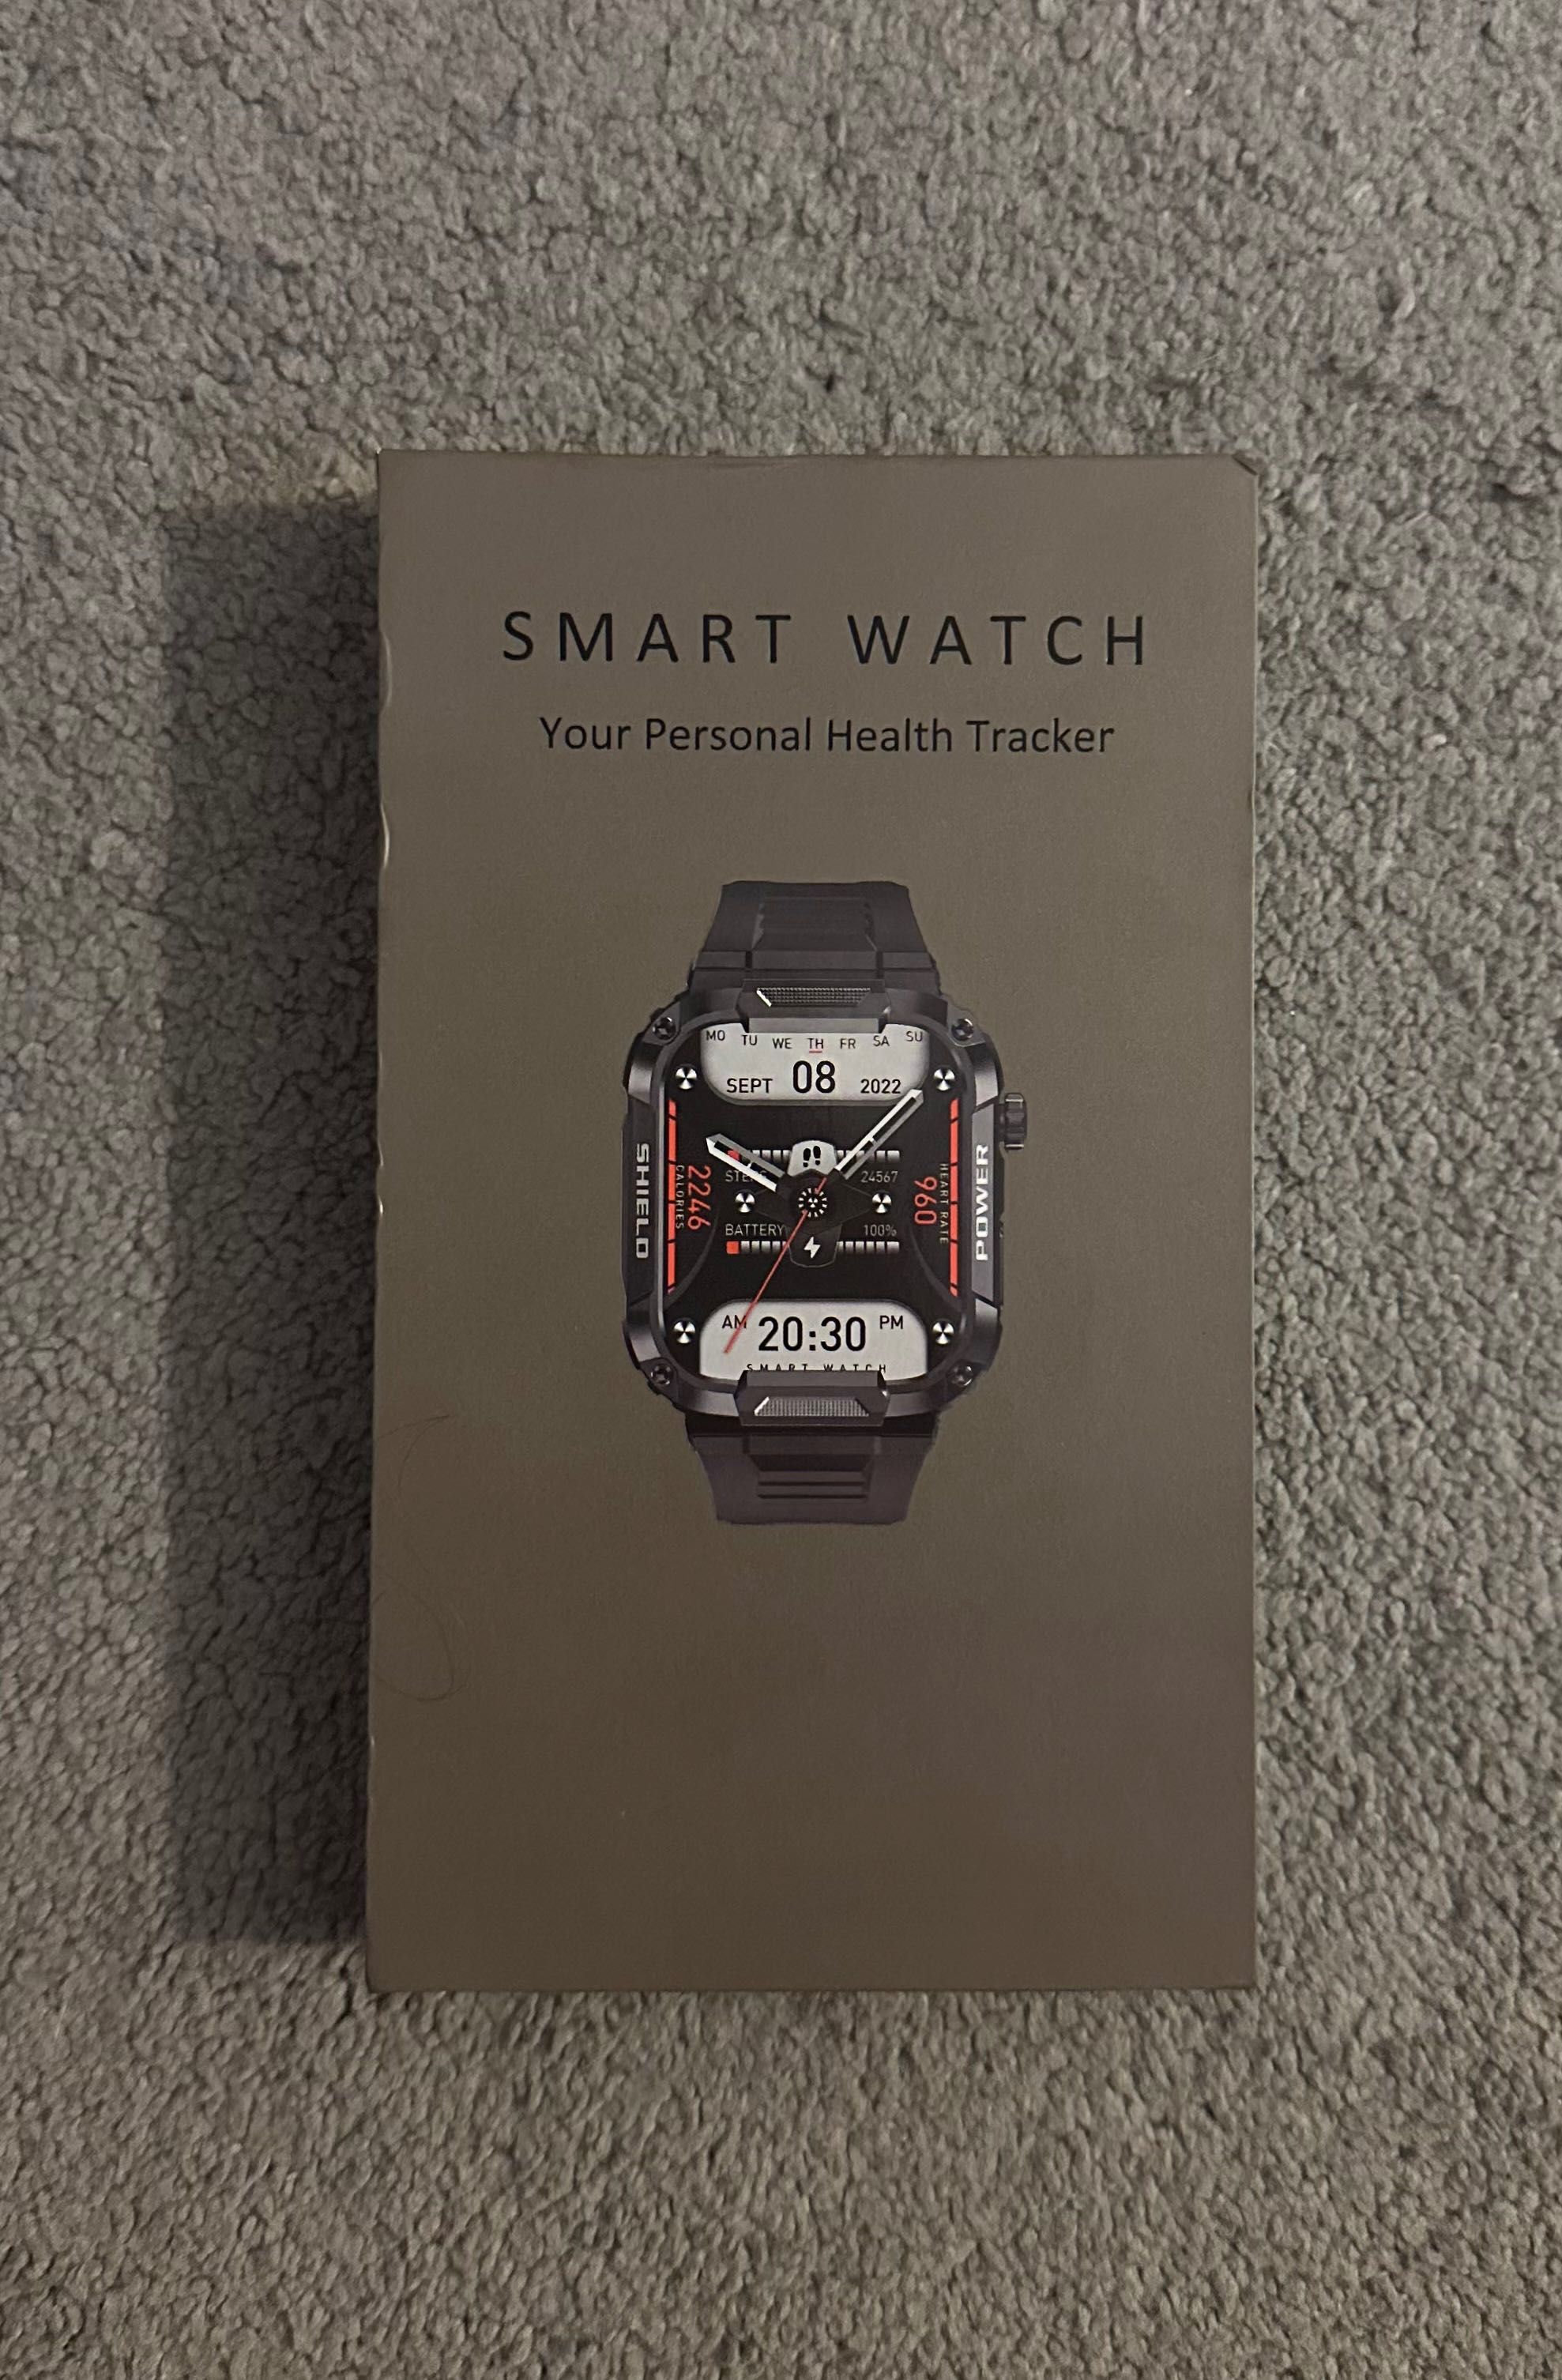 Smart Watch compatibil cu Android si IOS